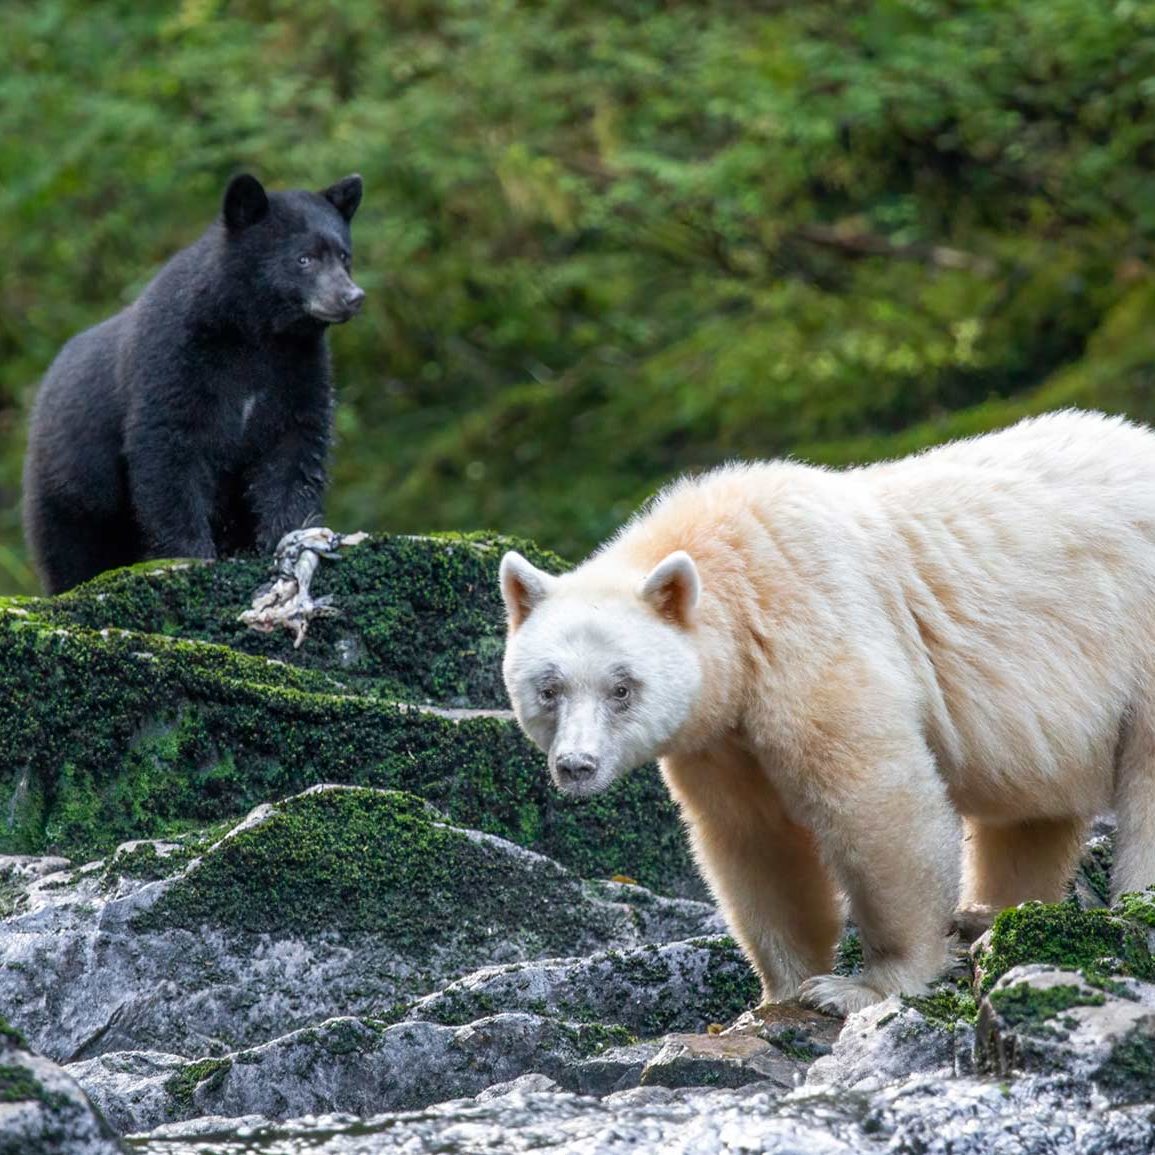 Spirit bear and a black bear standing in a river.